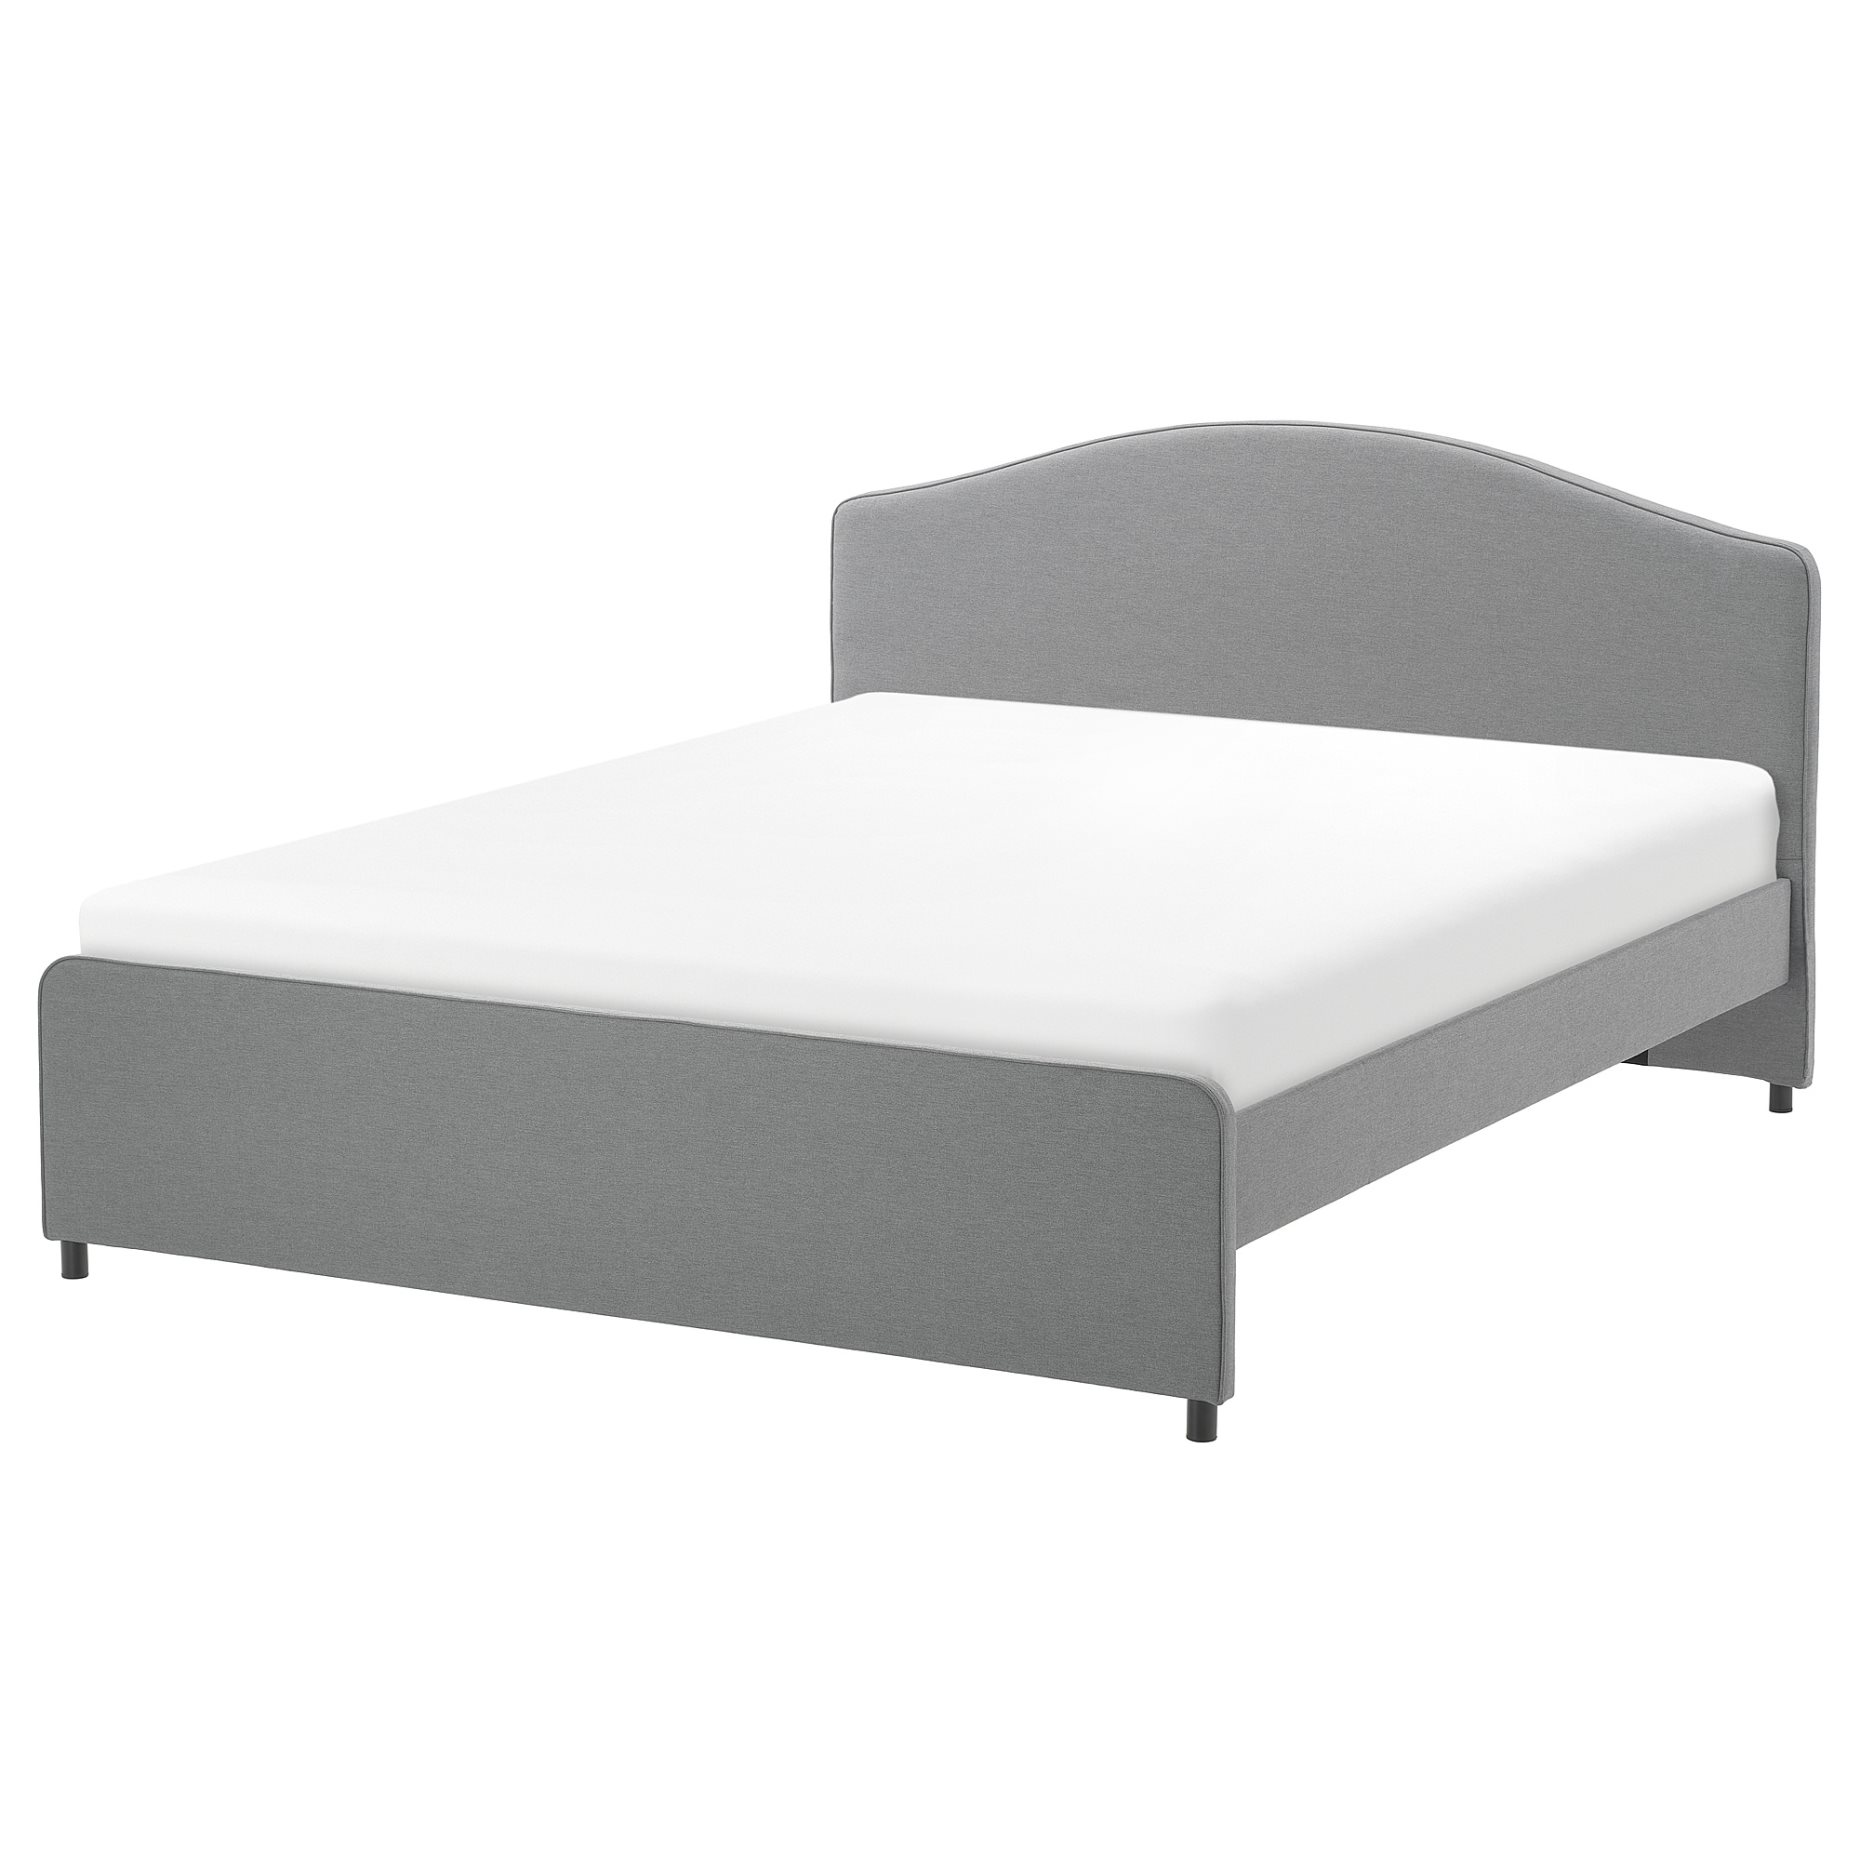 HAUGA, upholstered bed, 160x200 cm, 304.463.54